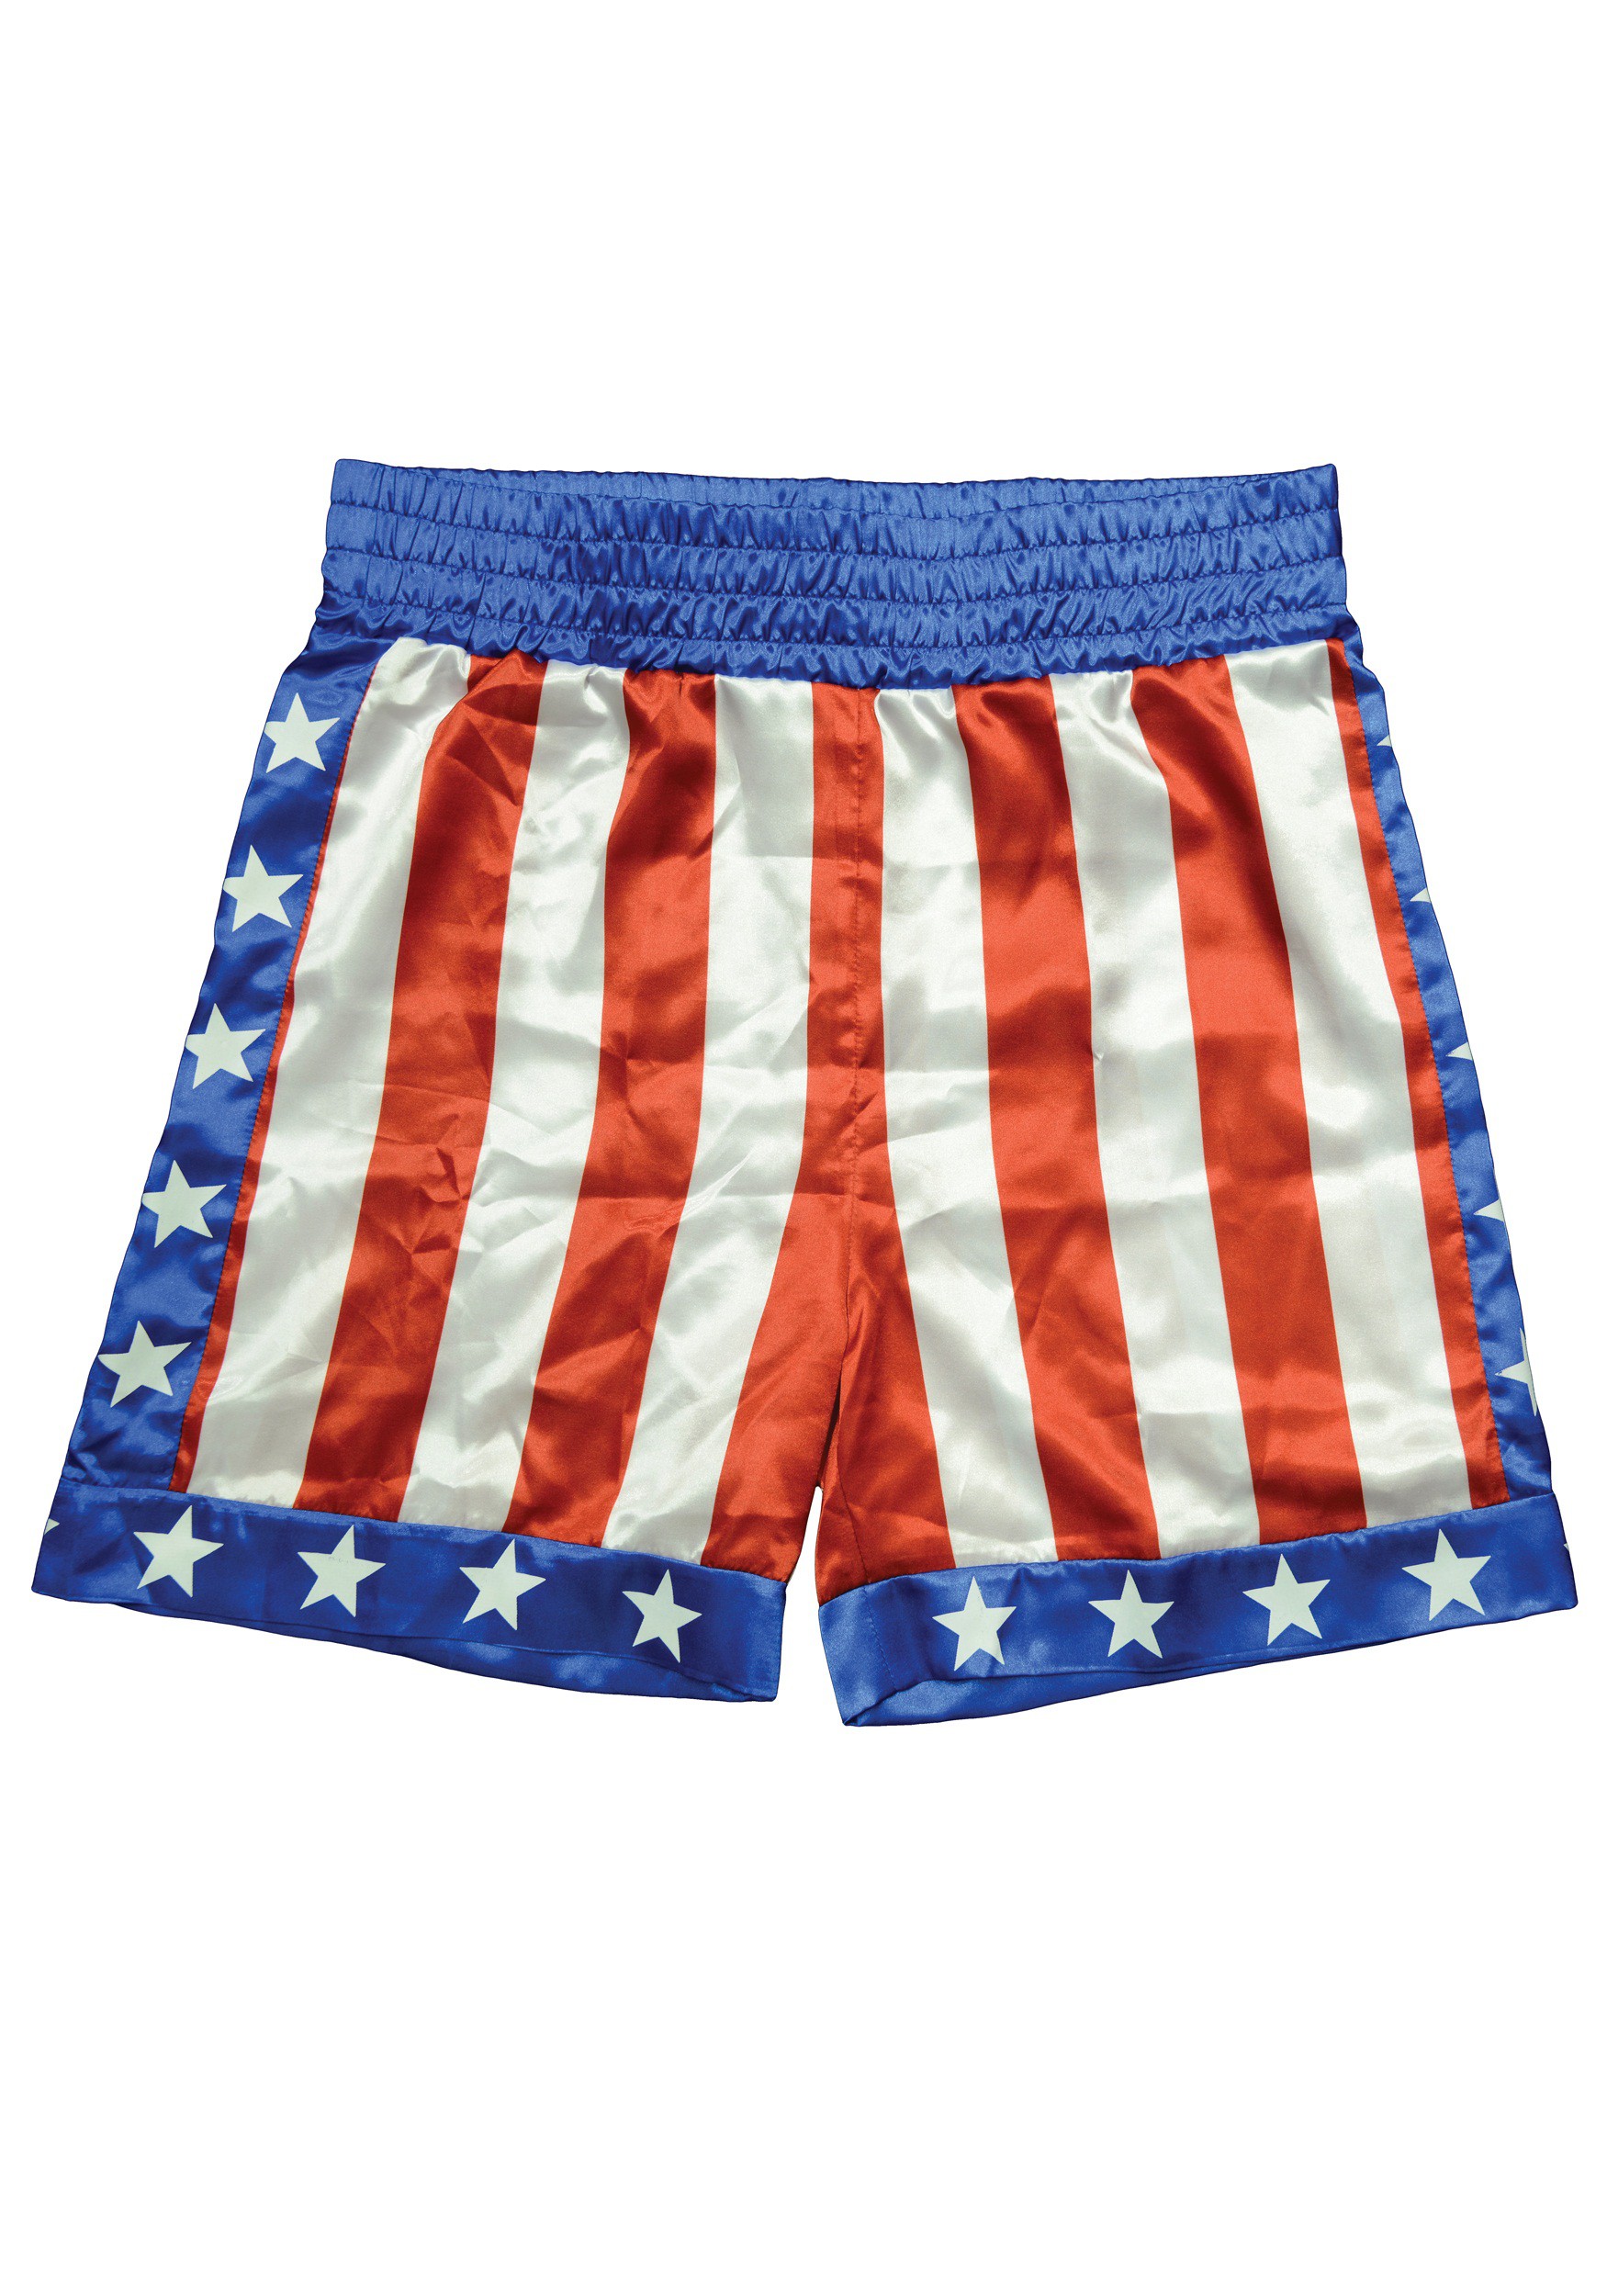 Apollo Creed Adult Boxing Trunks